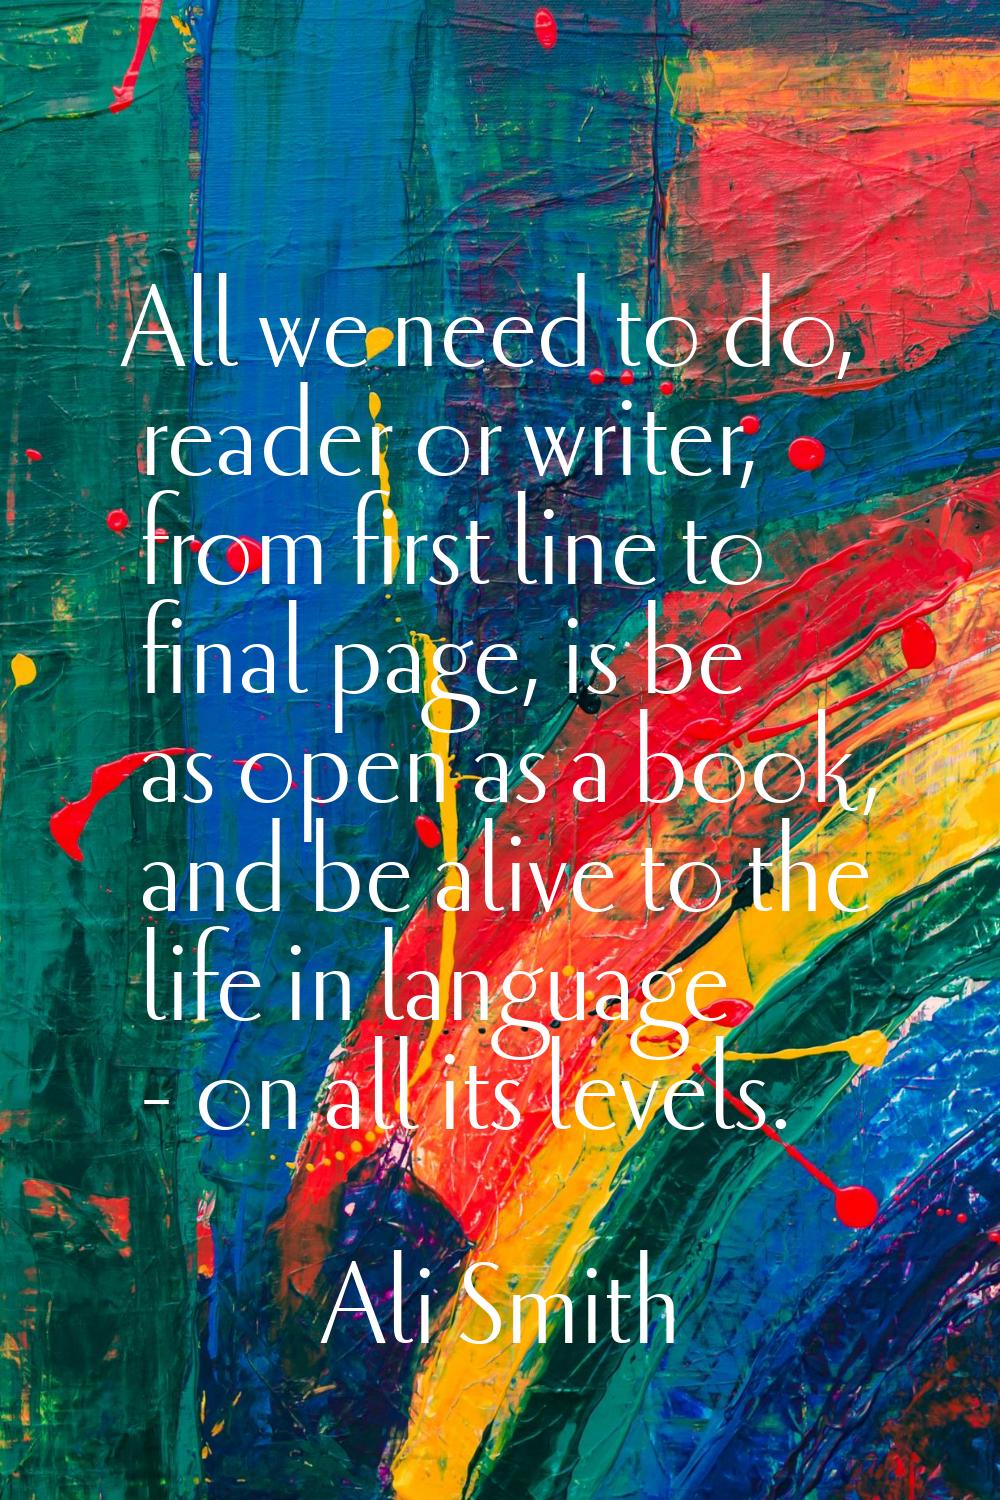 All we need to do, reader or writer, from first line to final page, is be as open as a book, and be